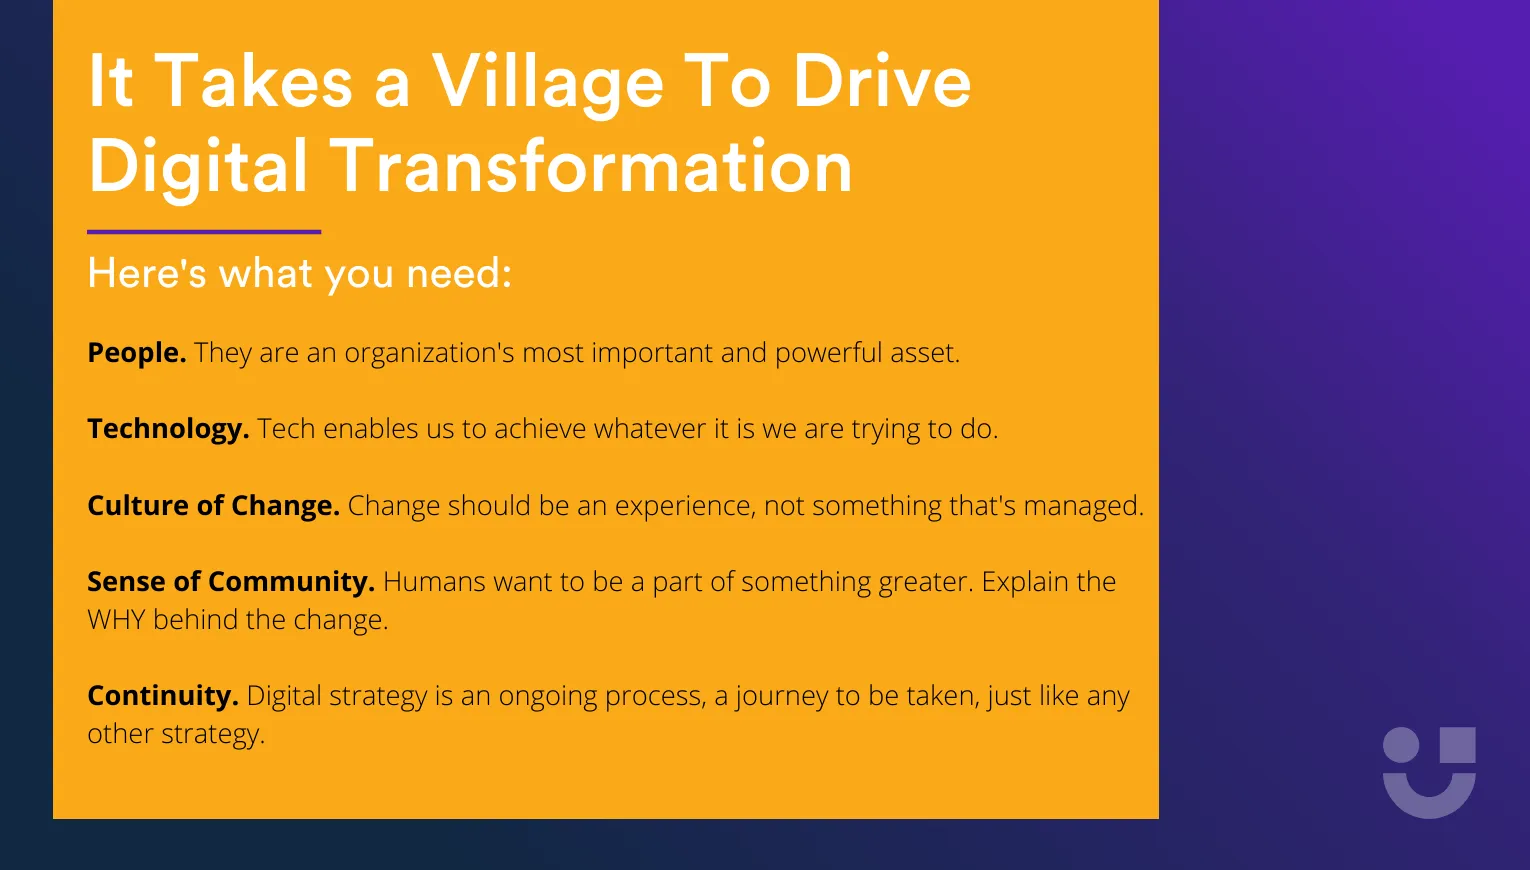 5 pillars needed to drive digital transformation written in white on a yellow and blue background. The 5 pillars are people, technology, culture of change, sense of community, and continuity.